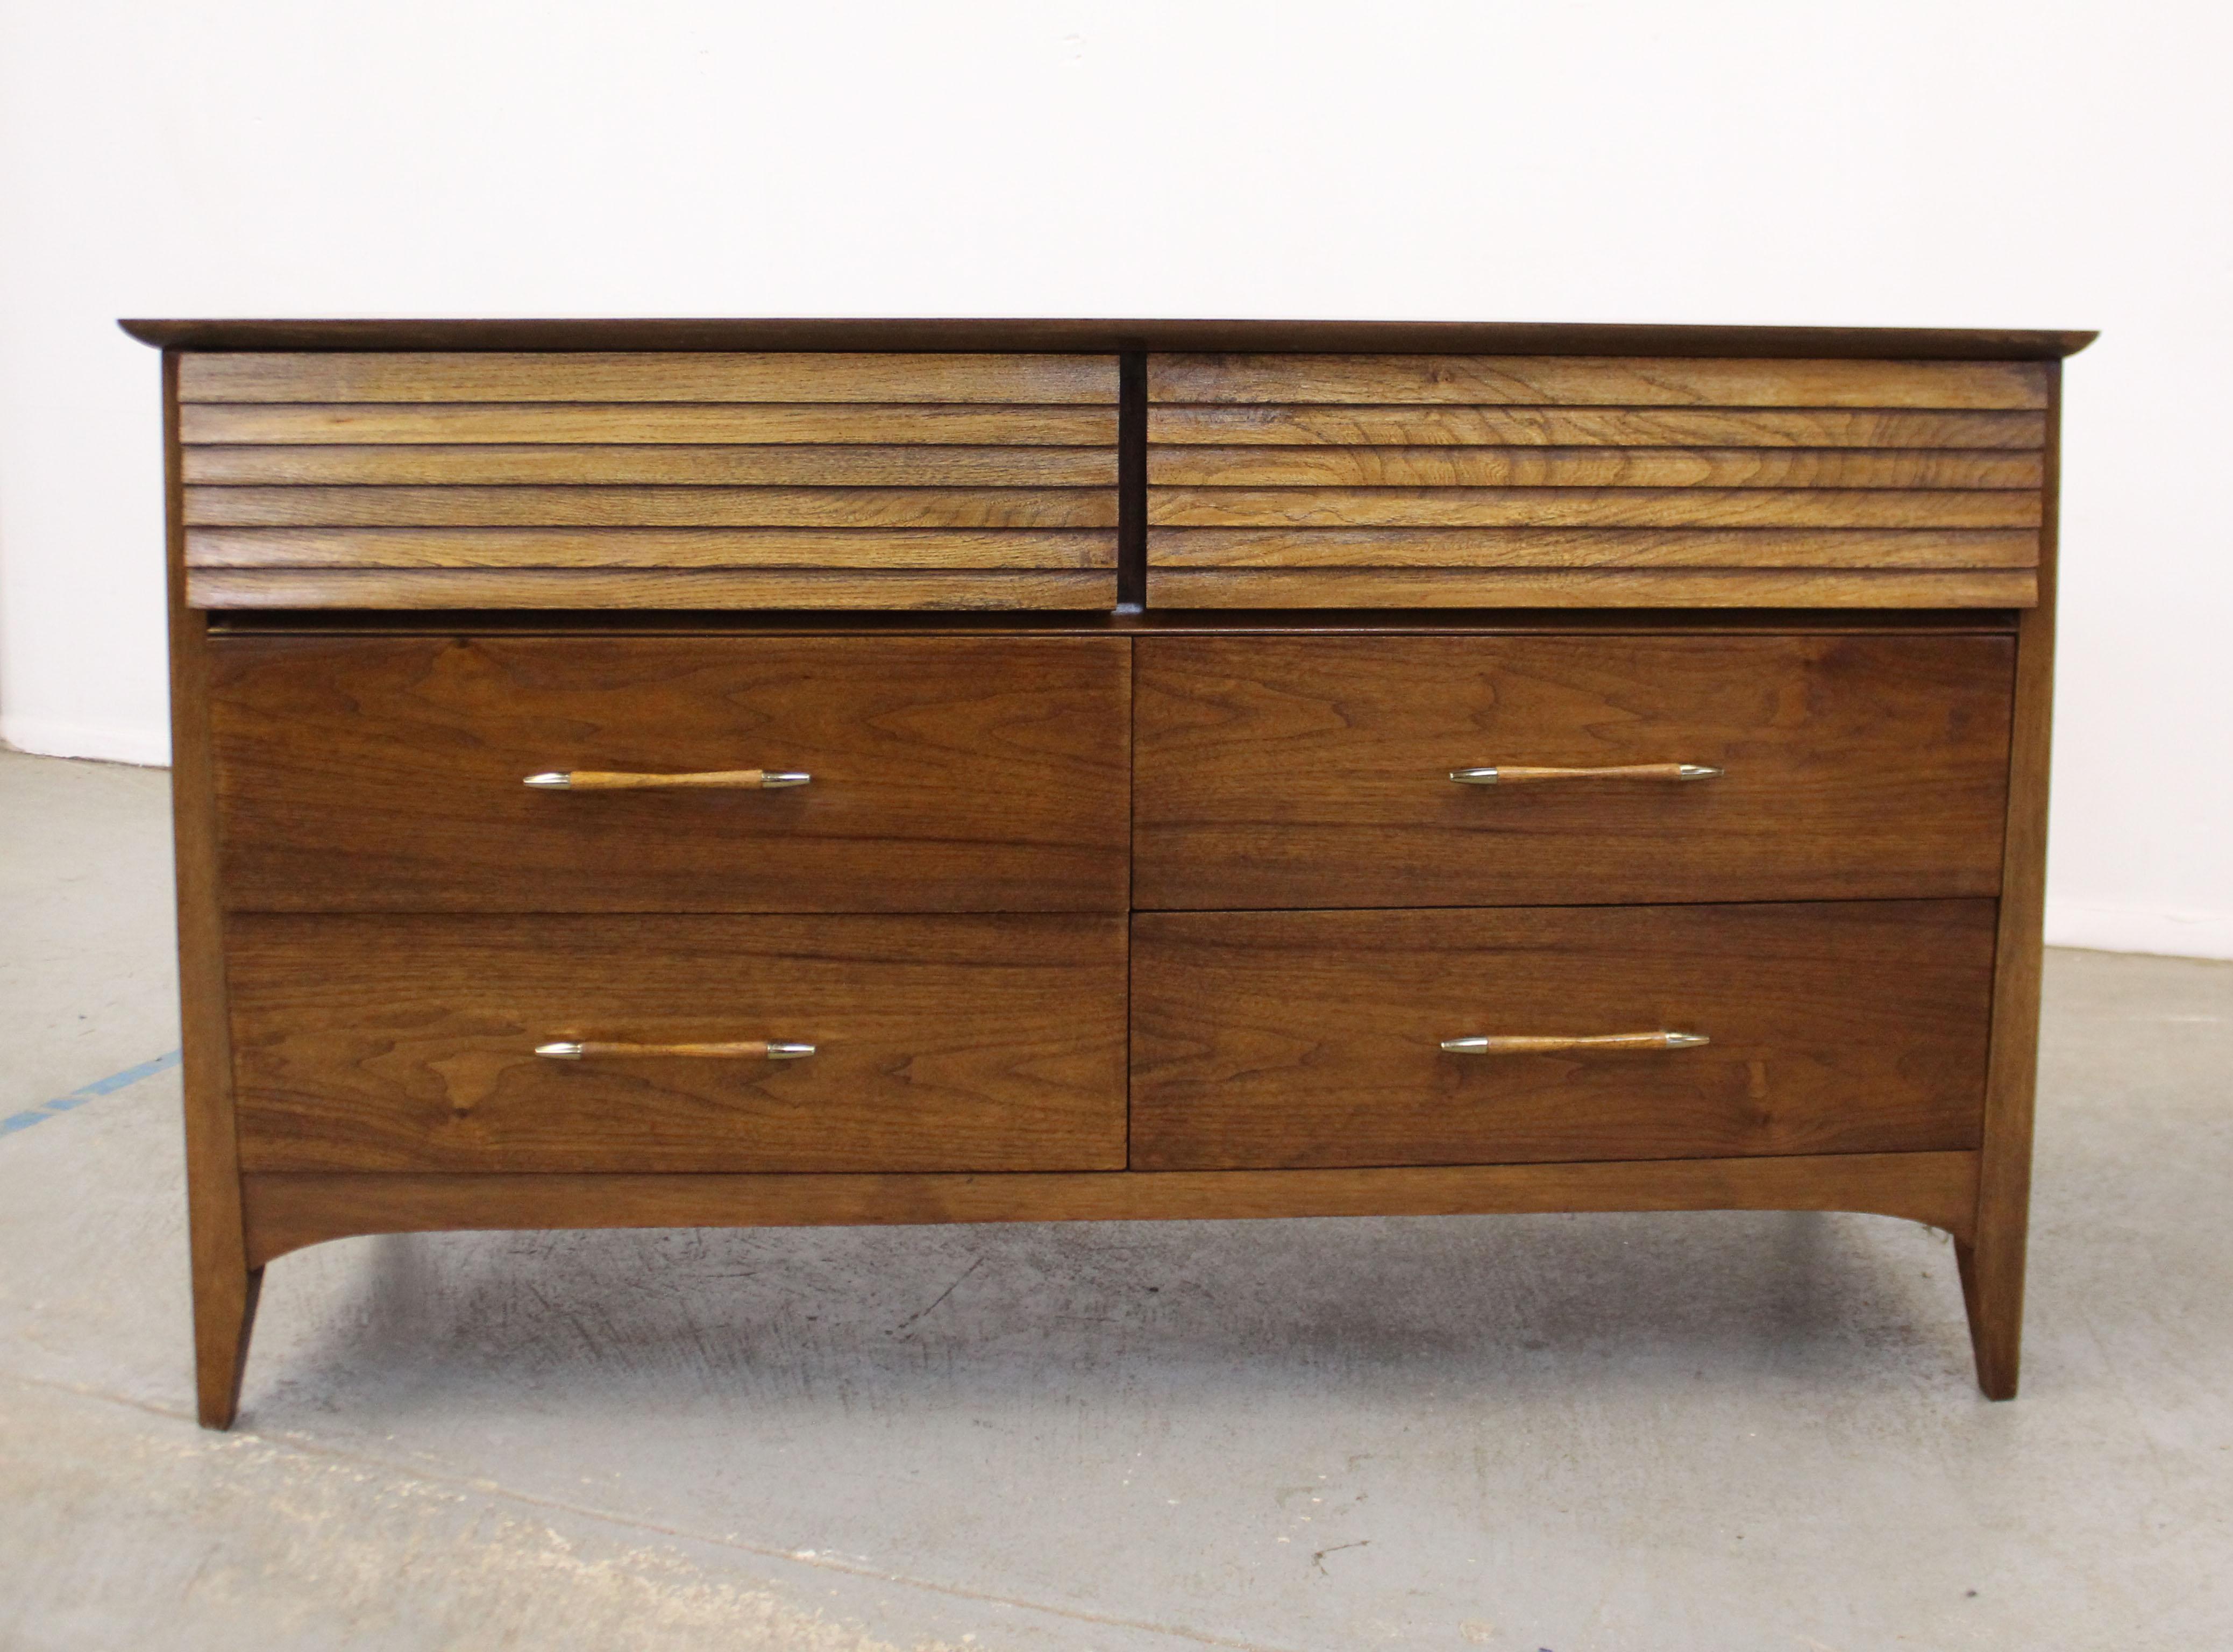 Offered is a vintage Mid-Century Modern walnut credenza. Features two top drawers with louvered fronts and 4 bottom drawers, all dovetailed. It is in excellent condition, has been refinished with minor surface wear. Some minor age wear on pulls. It